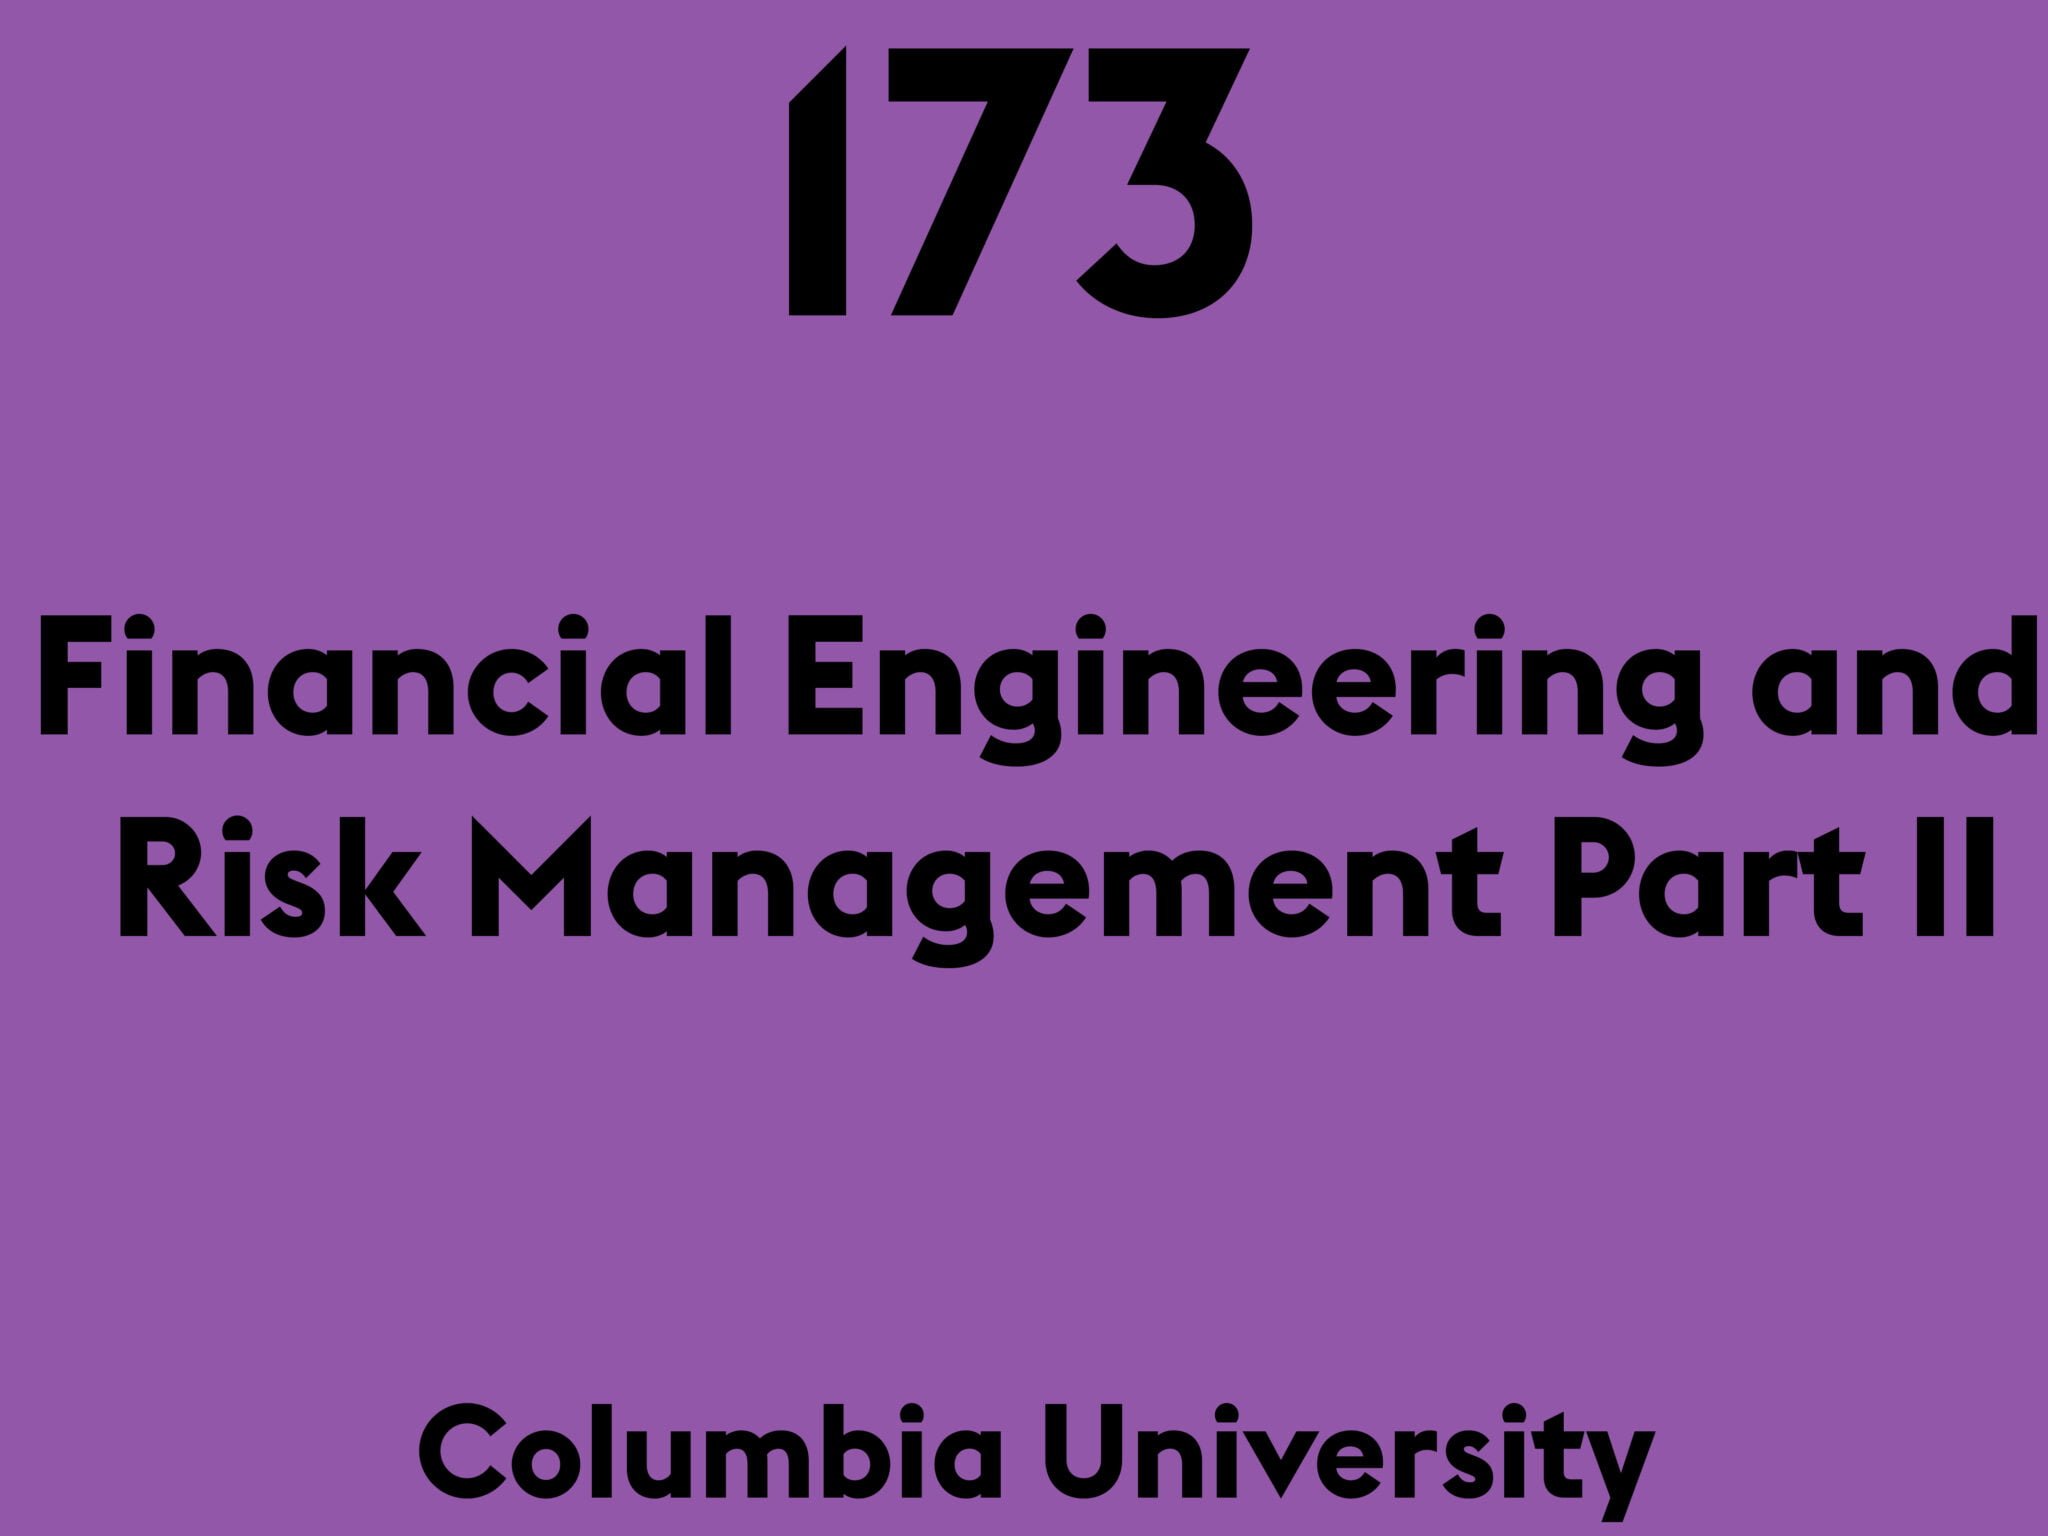 Financial Engineering and Risk Management Part II